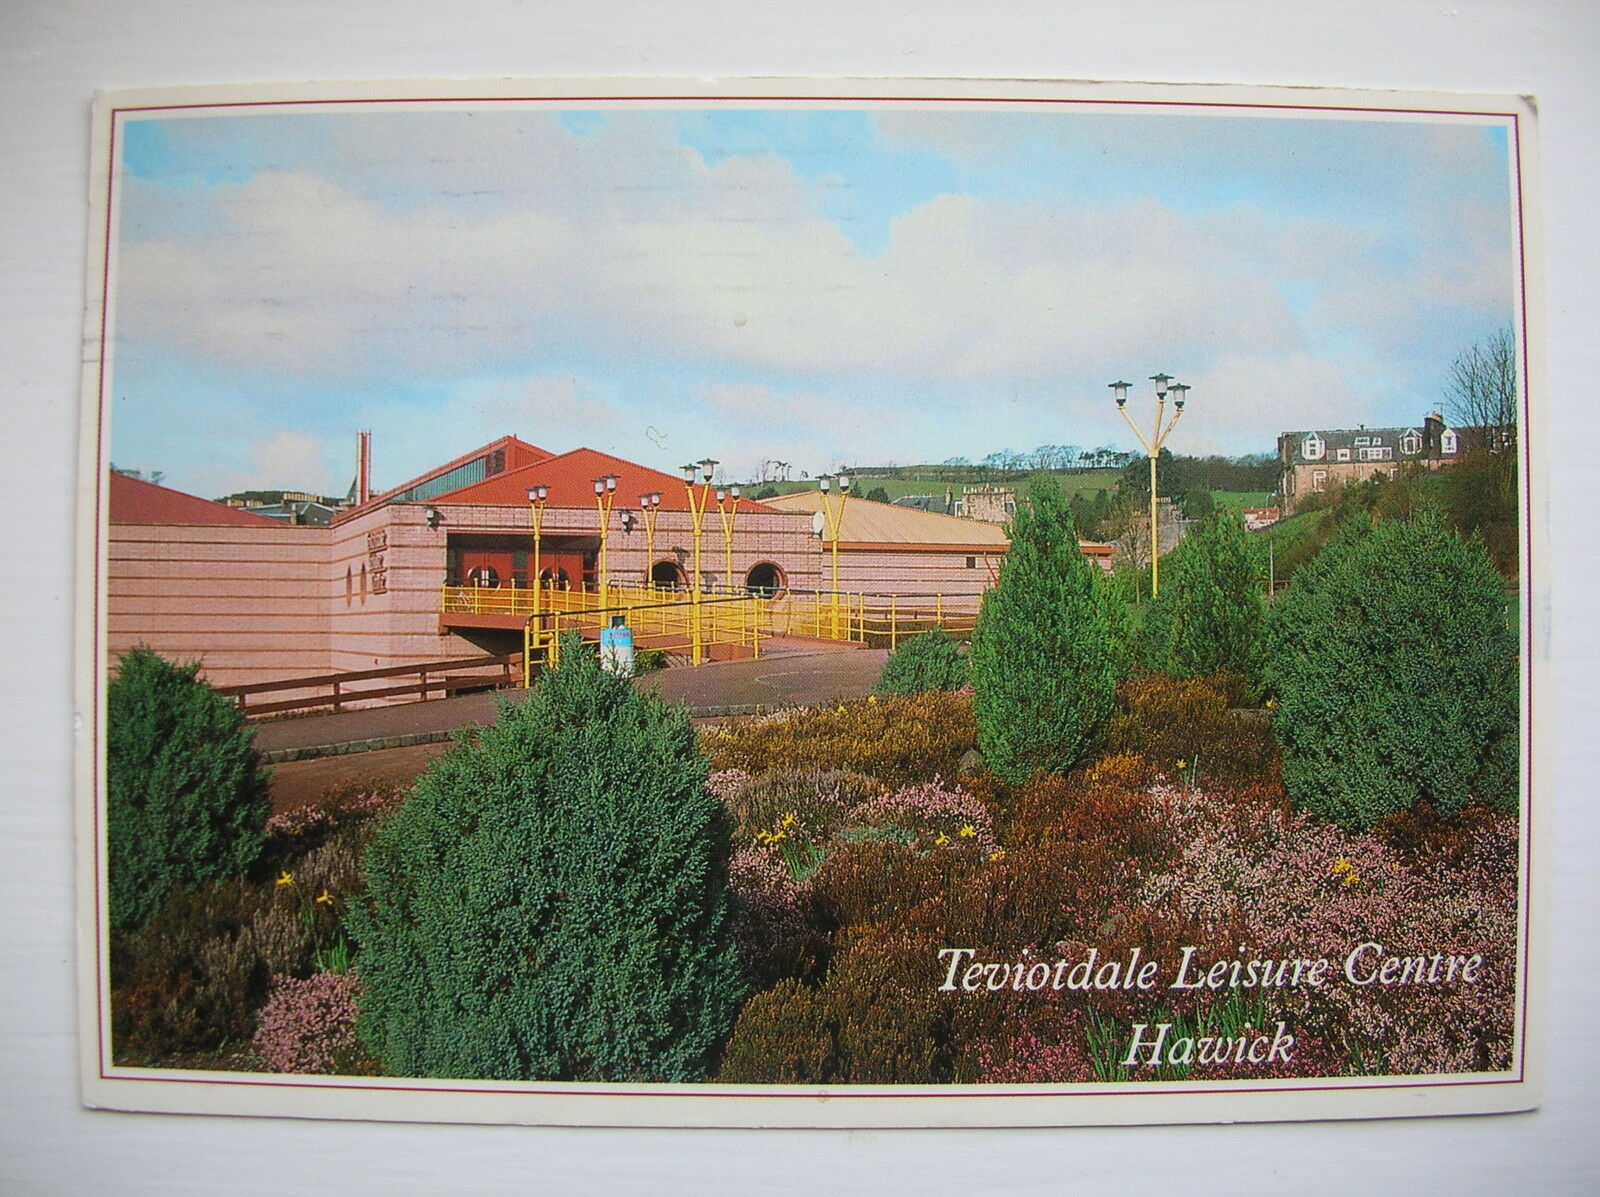 House Clearance - Hawick, Teviotdale Leisure Centre. (Whiteholme of Dundee)